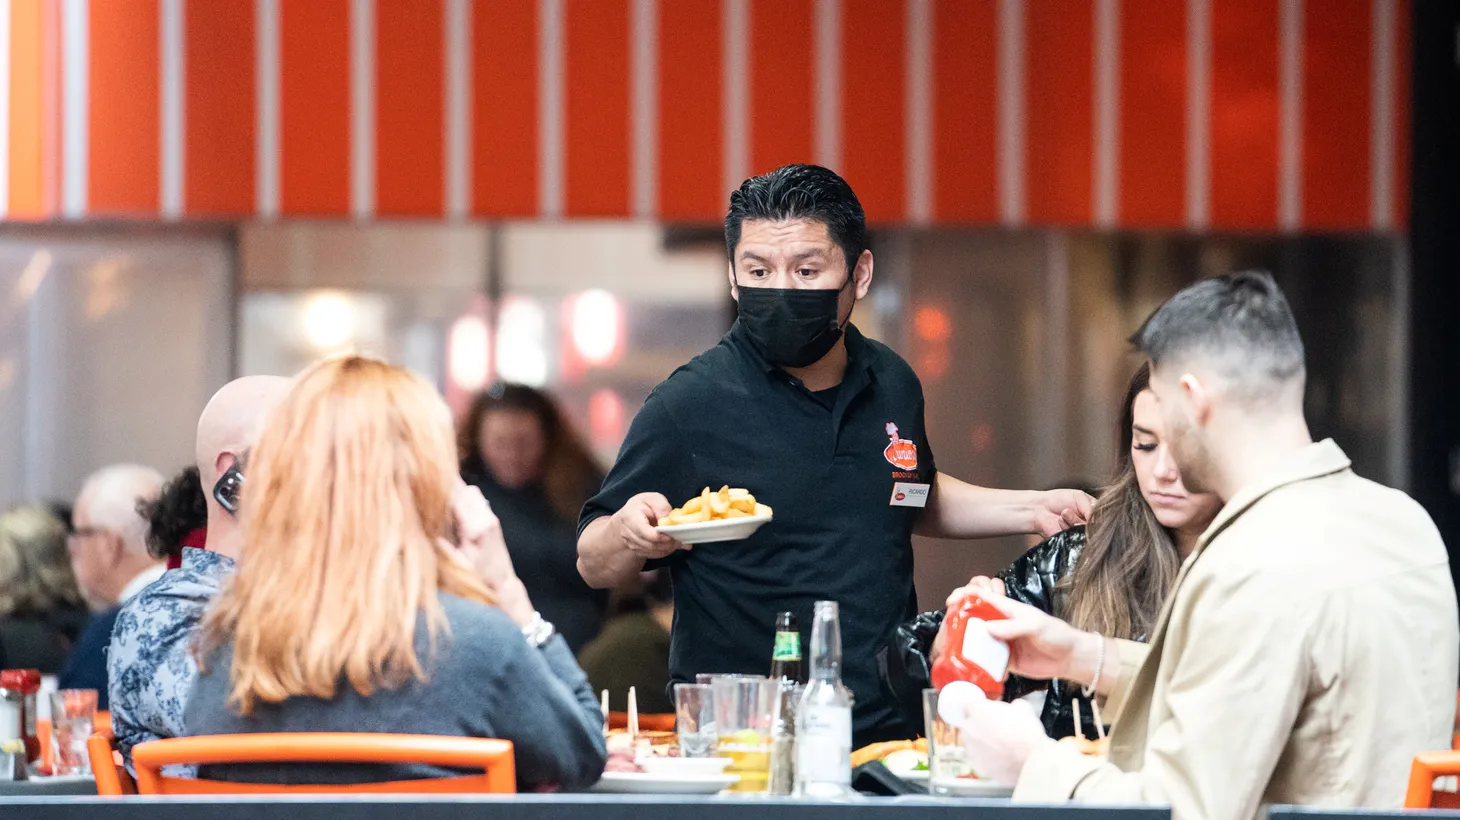 A waiter serves food at a restaurant near Times Square in New York City, U.S., December 16, 2021. “If I go to a restaurant and I eat and drink, what is it that we would think that a virus would take a vacation while you're eating and drinking?” says Dr. Michael Osterholm.